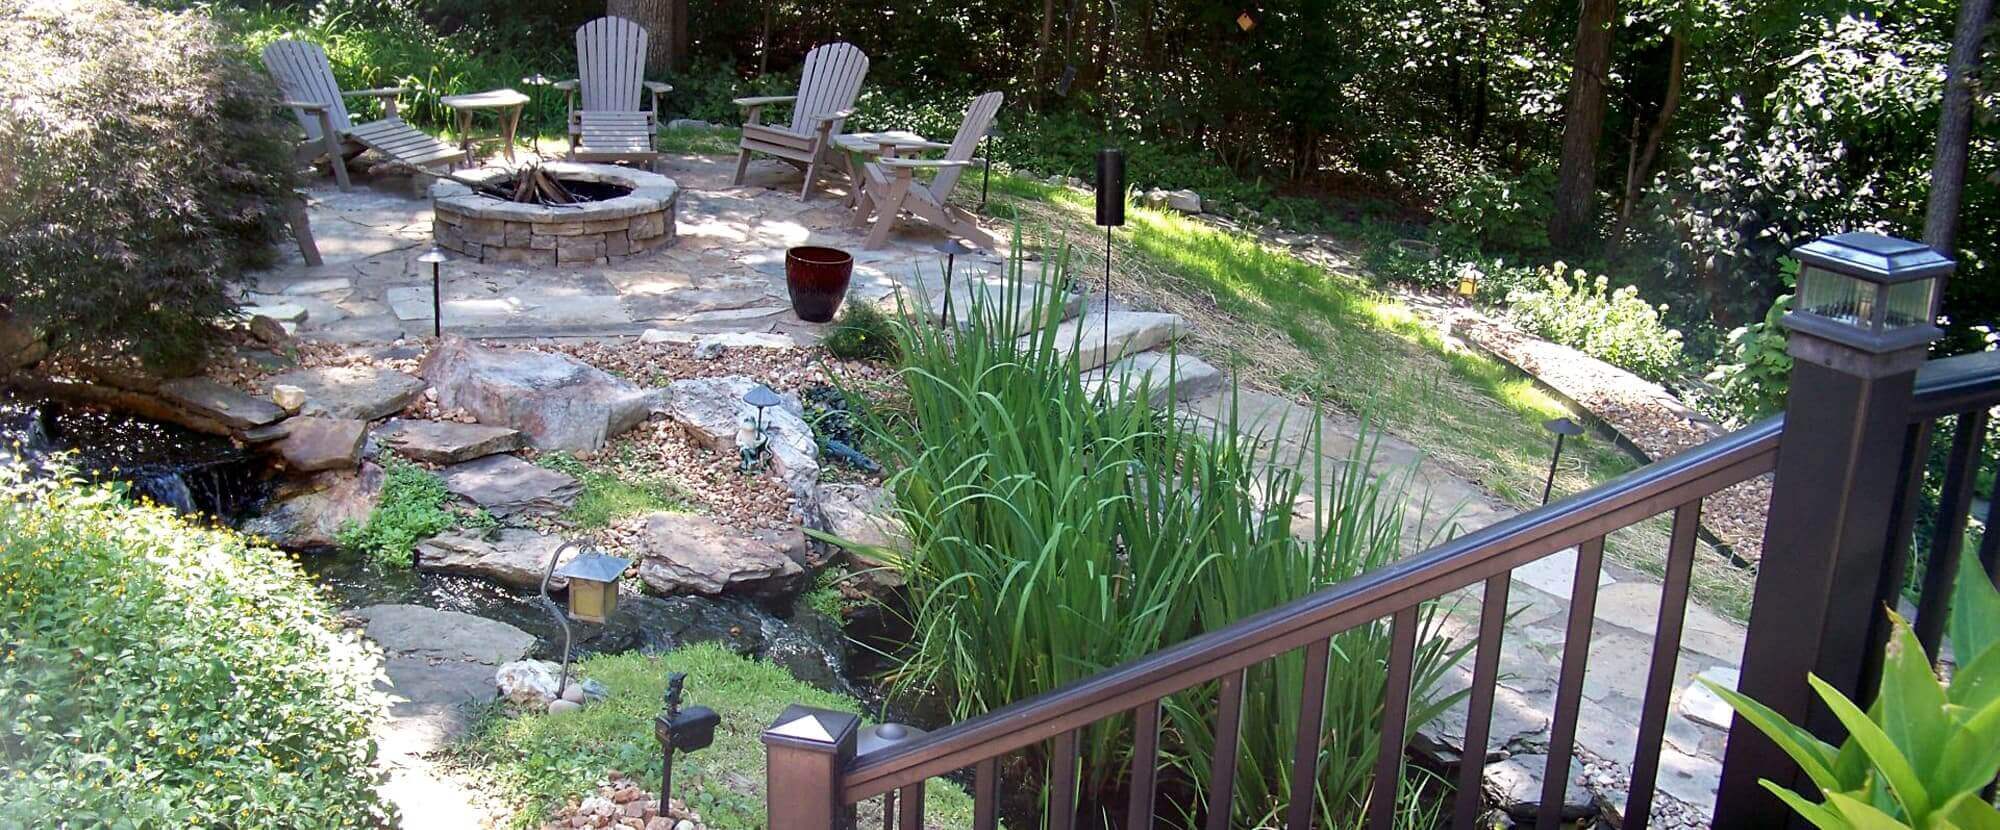 St Louis Landscaping Company Malone, St Louis Landscaping Companies